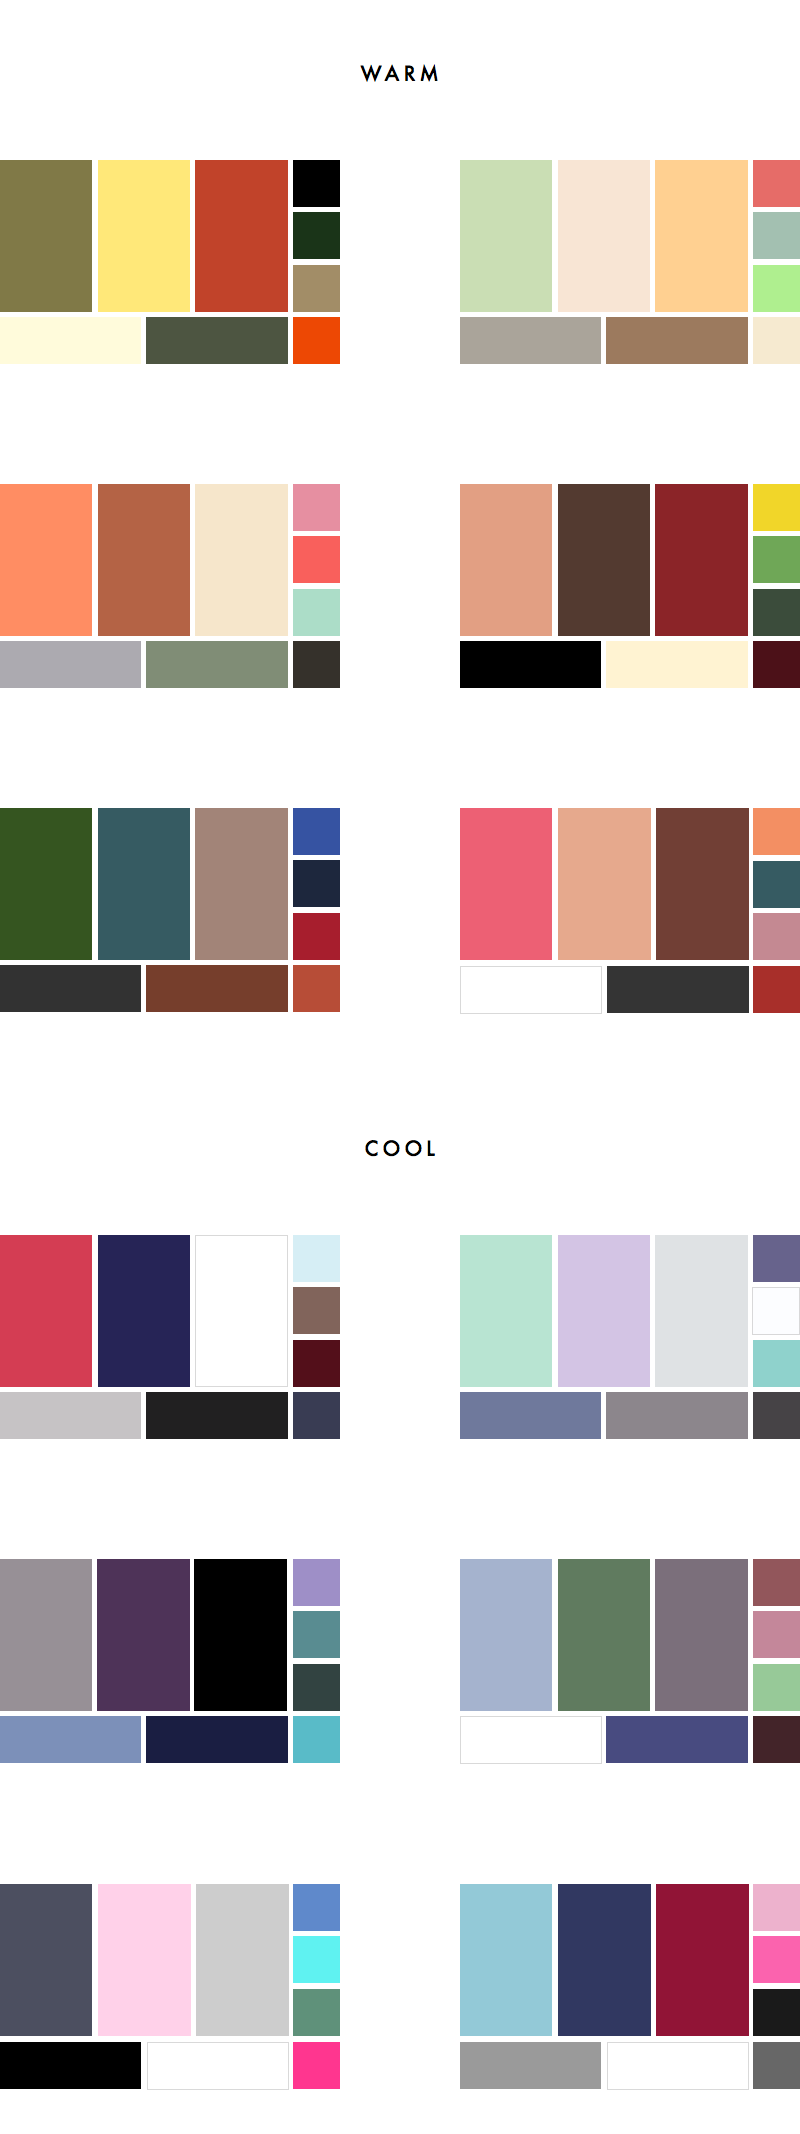 36 Colour Palettes for your Wardrobe Part I: Warm vs Cool